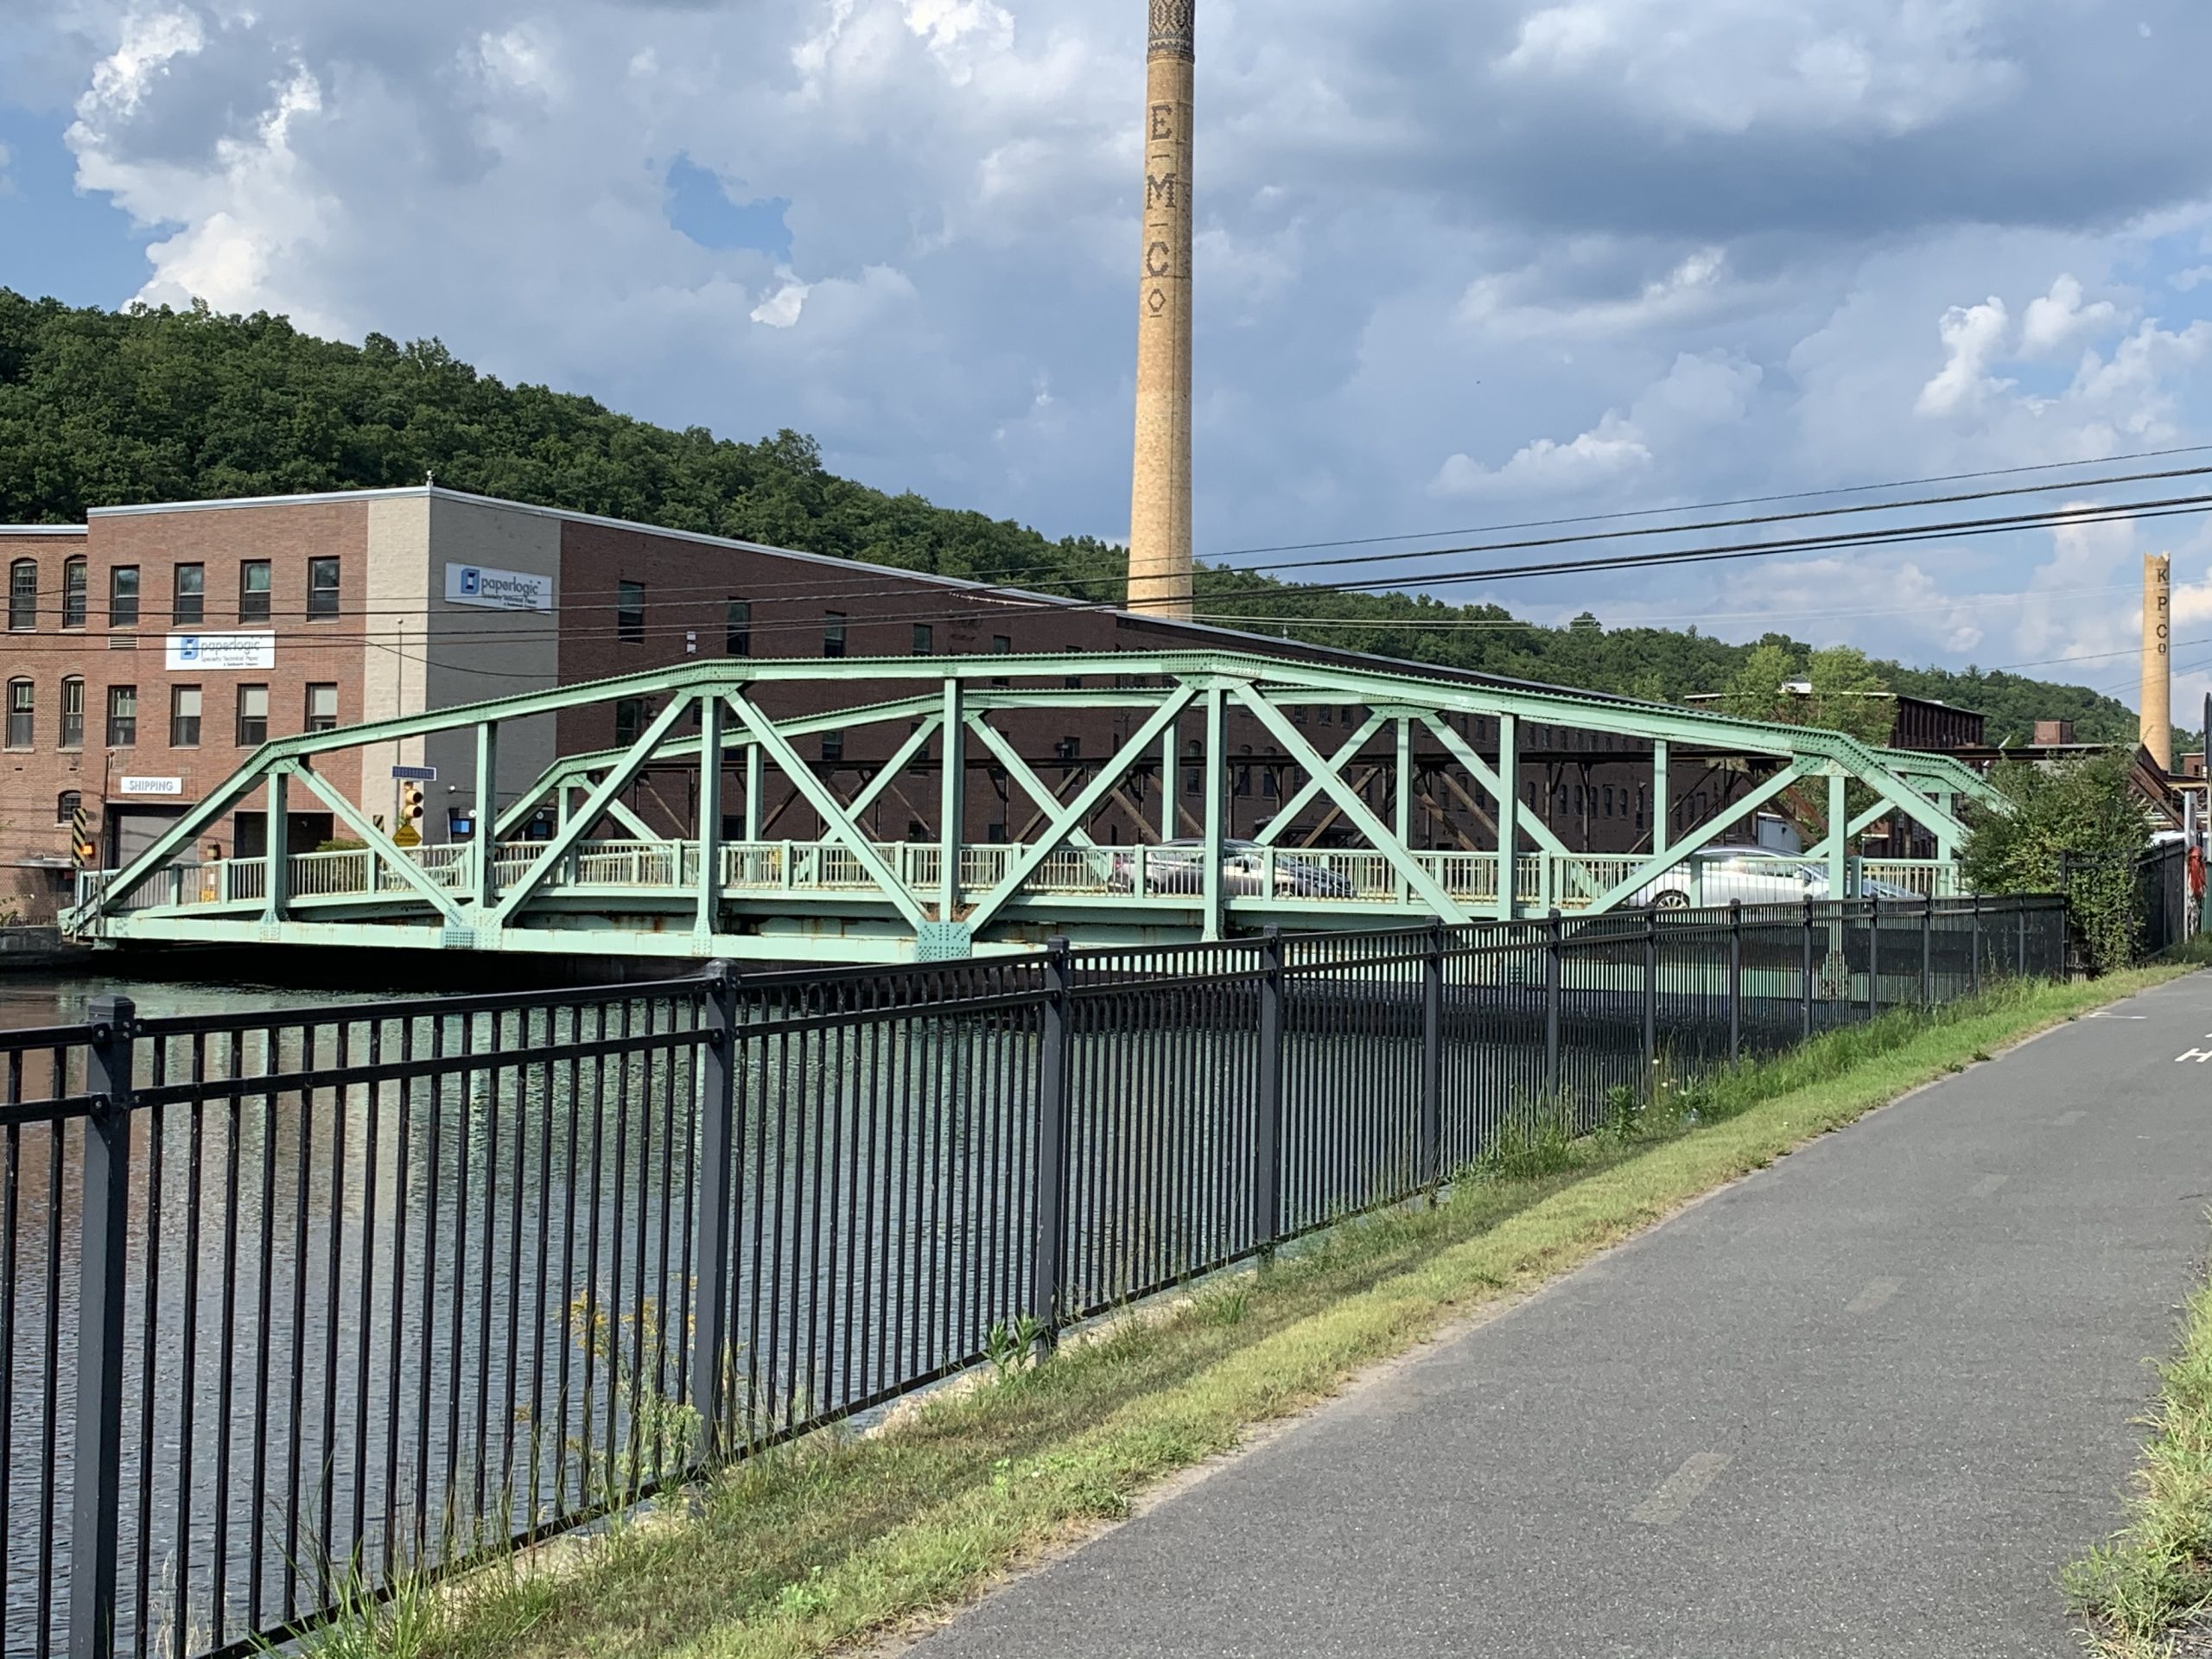 View looking east on the Canal Rail Trail, former industrial infrastructure, Turners Falls, MA